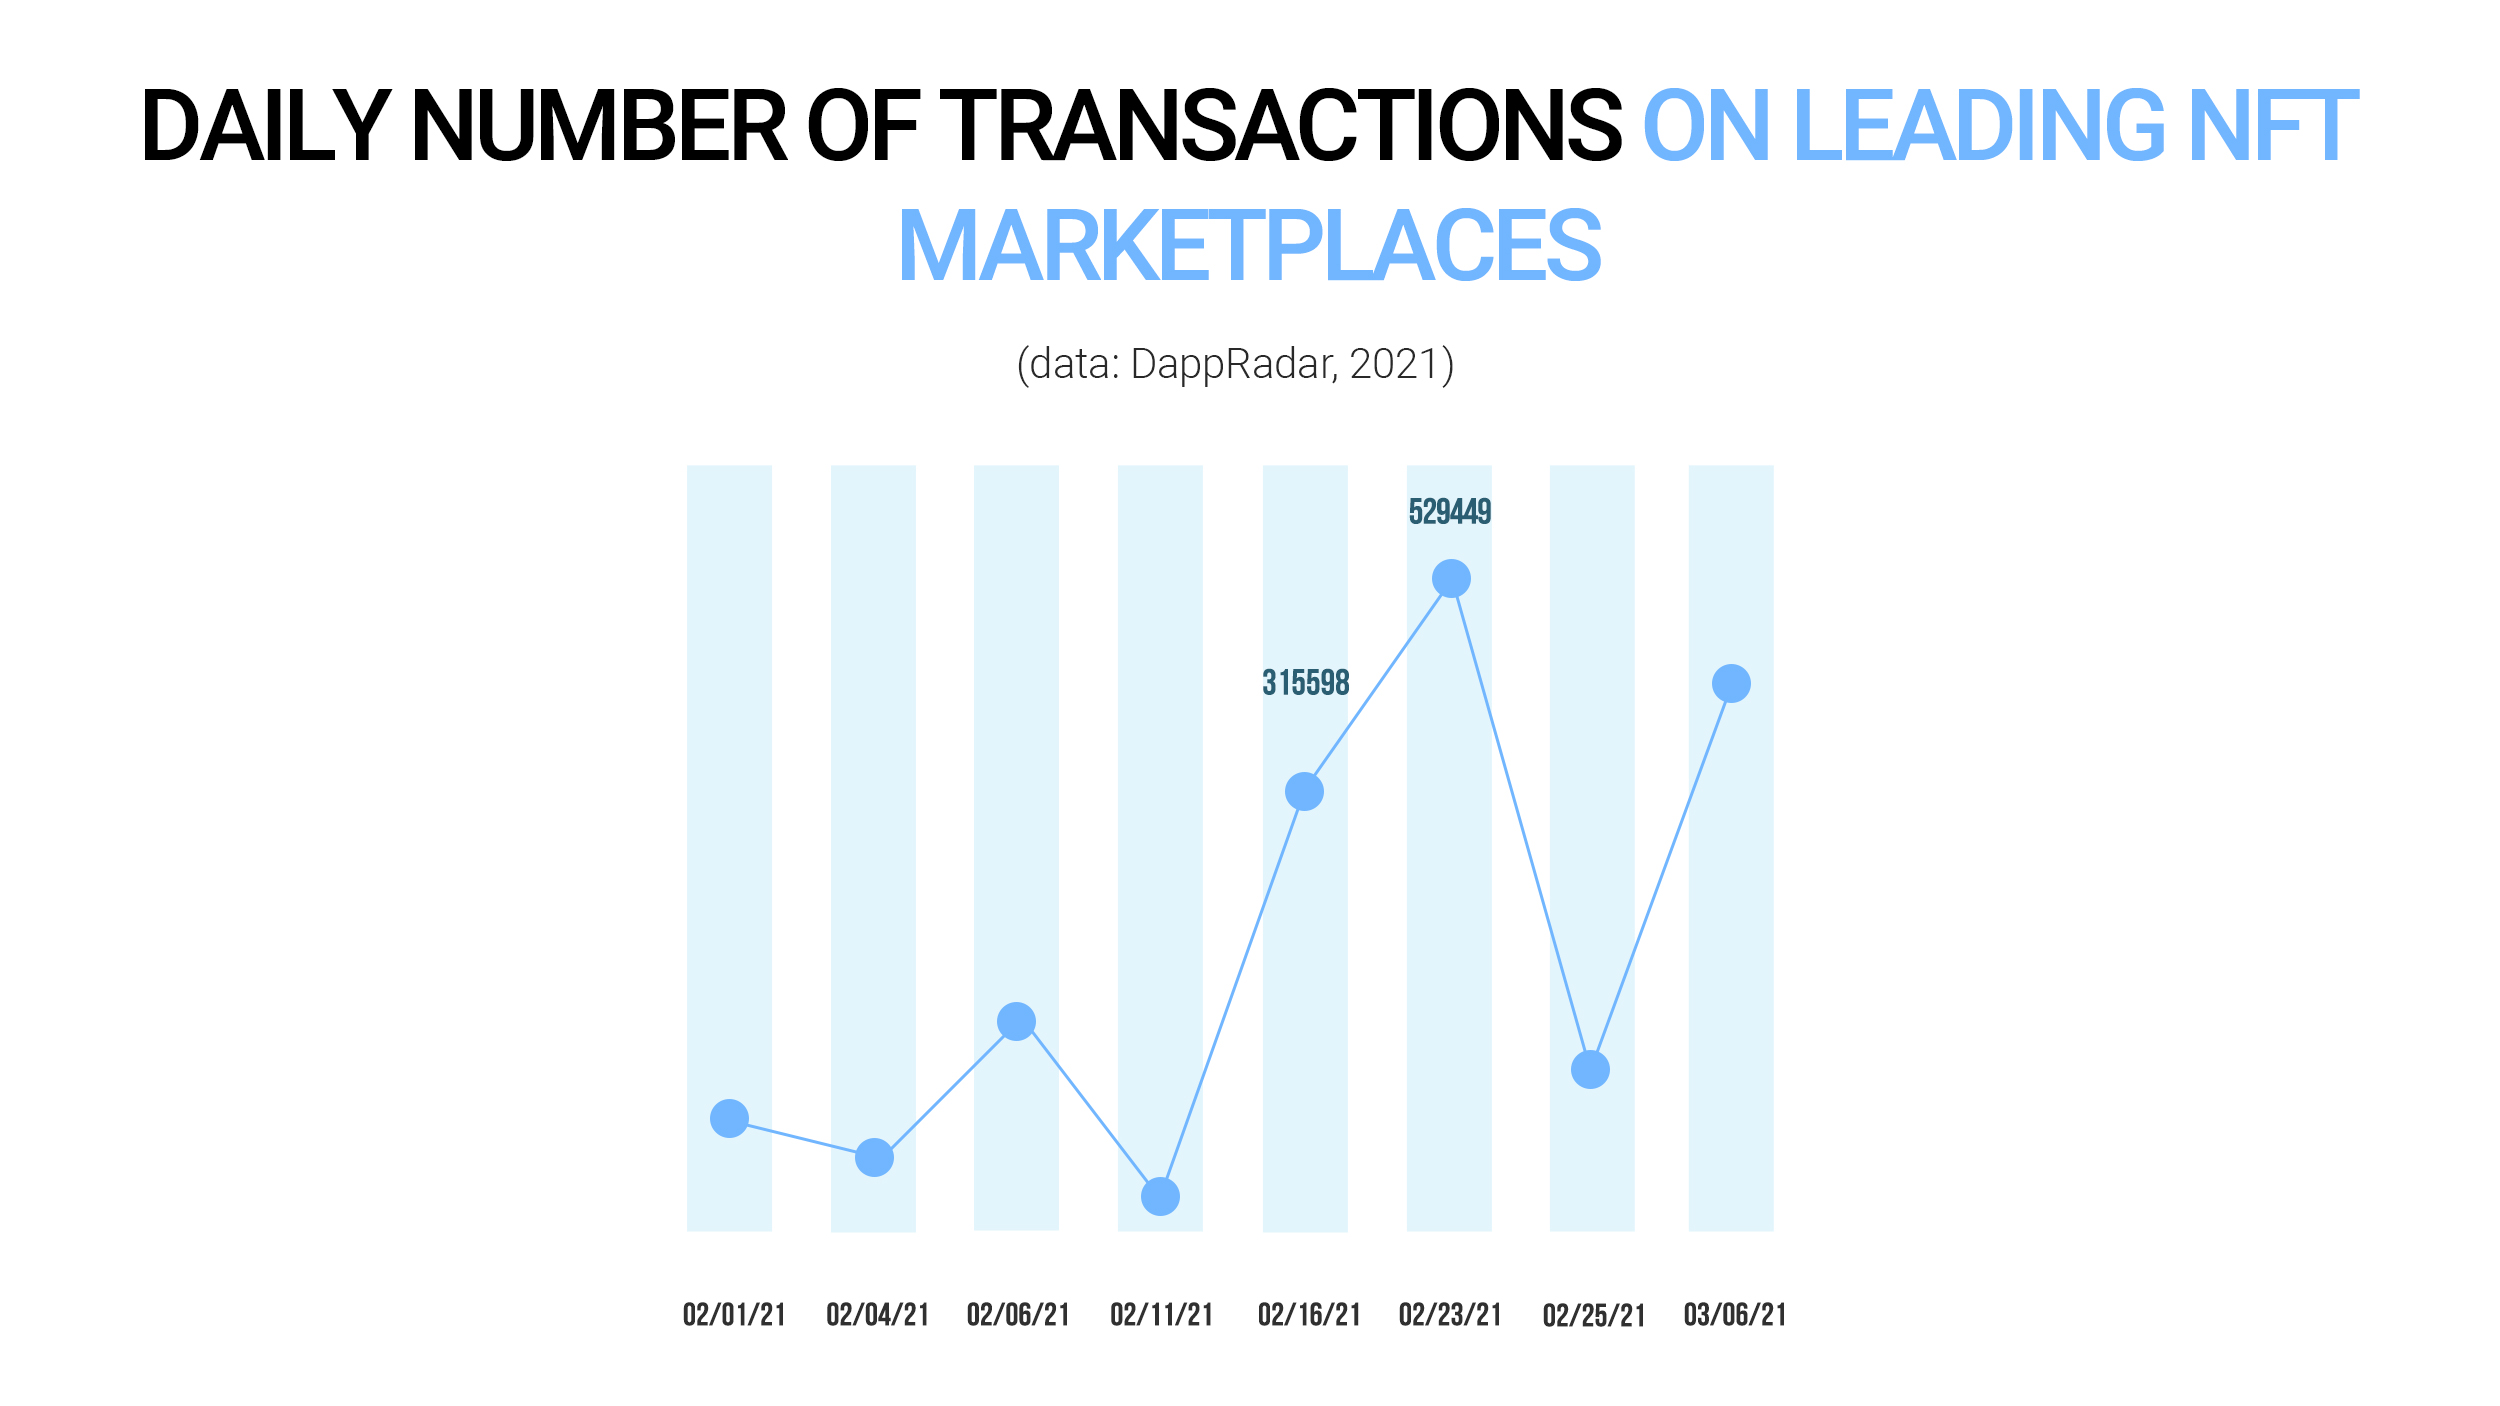 Daily number of transactions on leading NFT marketplaces